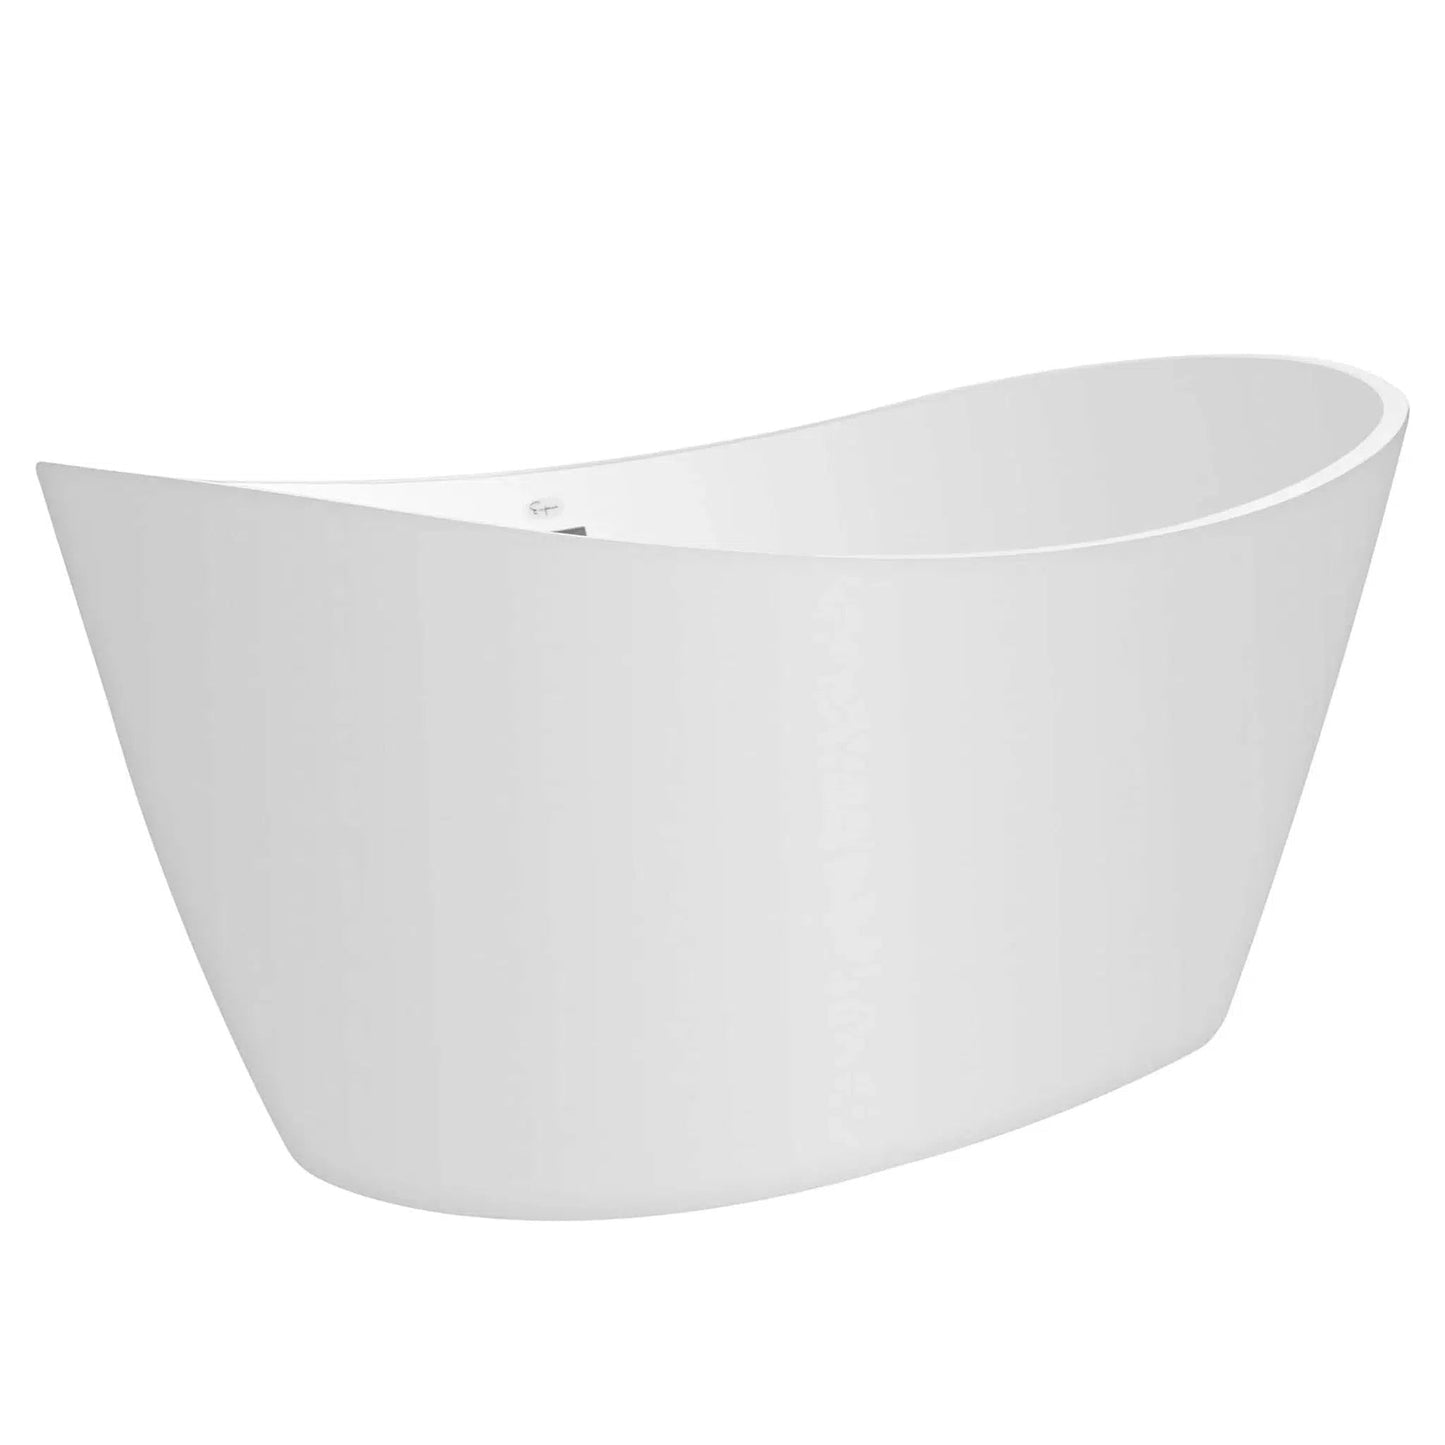 Empava 67" White Freestanding Oval Soaking Bathtub With LED Strip Below With Center Drain